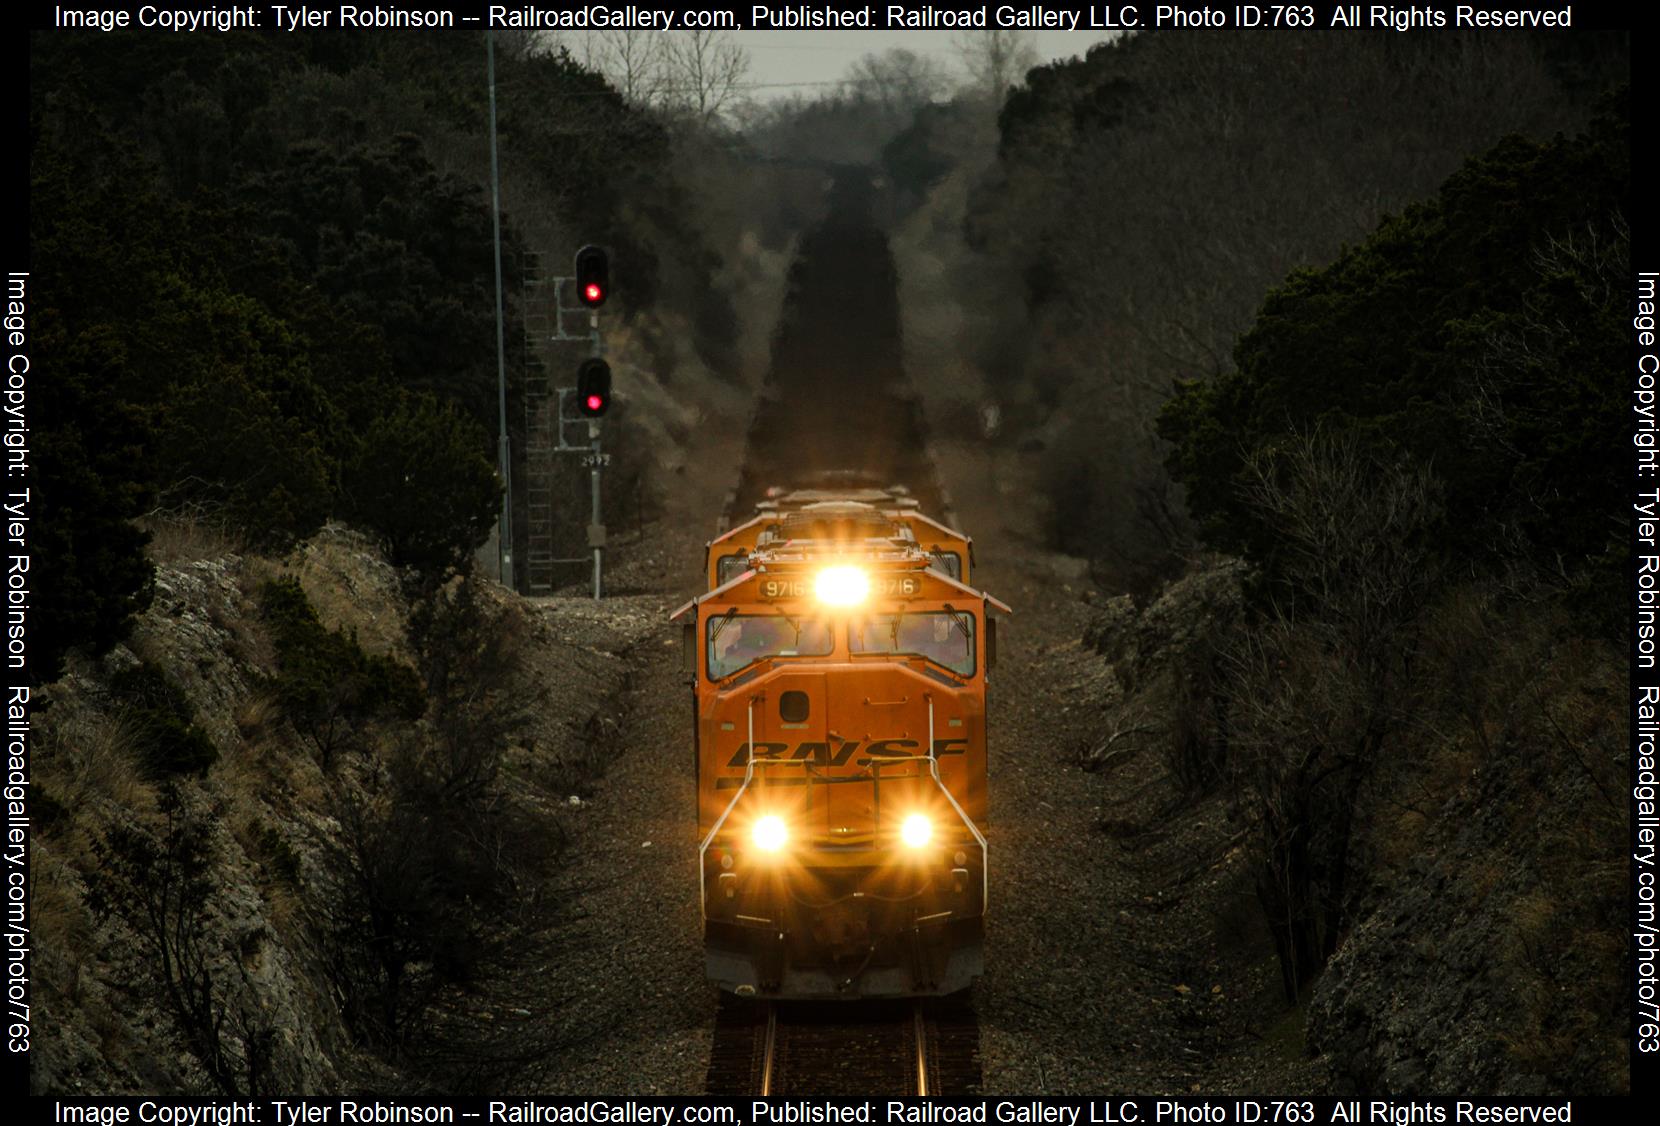 BNSF 9716 is a class SD70MACe and  is pictured in Blum, Texas, USA.  This was taken along the Fort Worth Subdivision on the BNSF Railway. Photo Copyright: Tyler Robinson uploaded to Railroad Gallery on 02/26/2023. This photograph of BNSF 9716 was taken on Sunday, January 29, 2023. All Rights Reserved. 